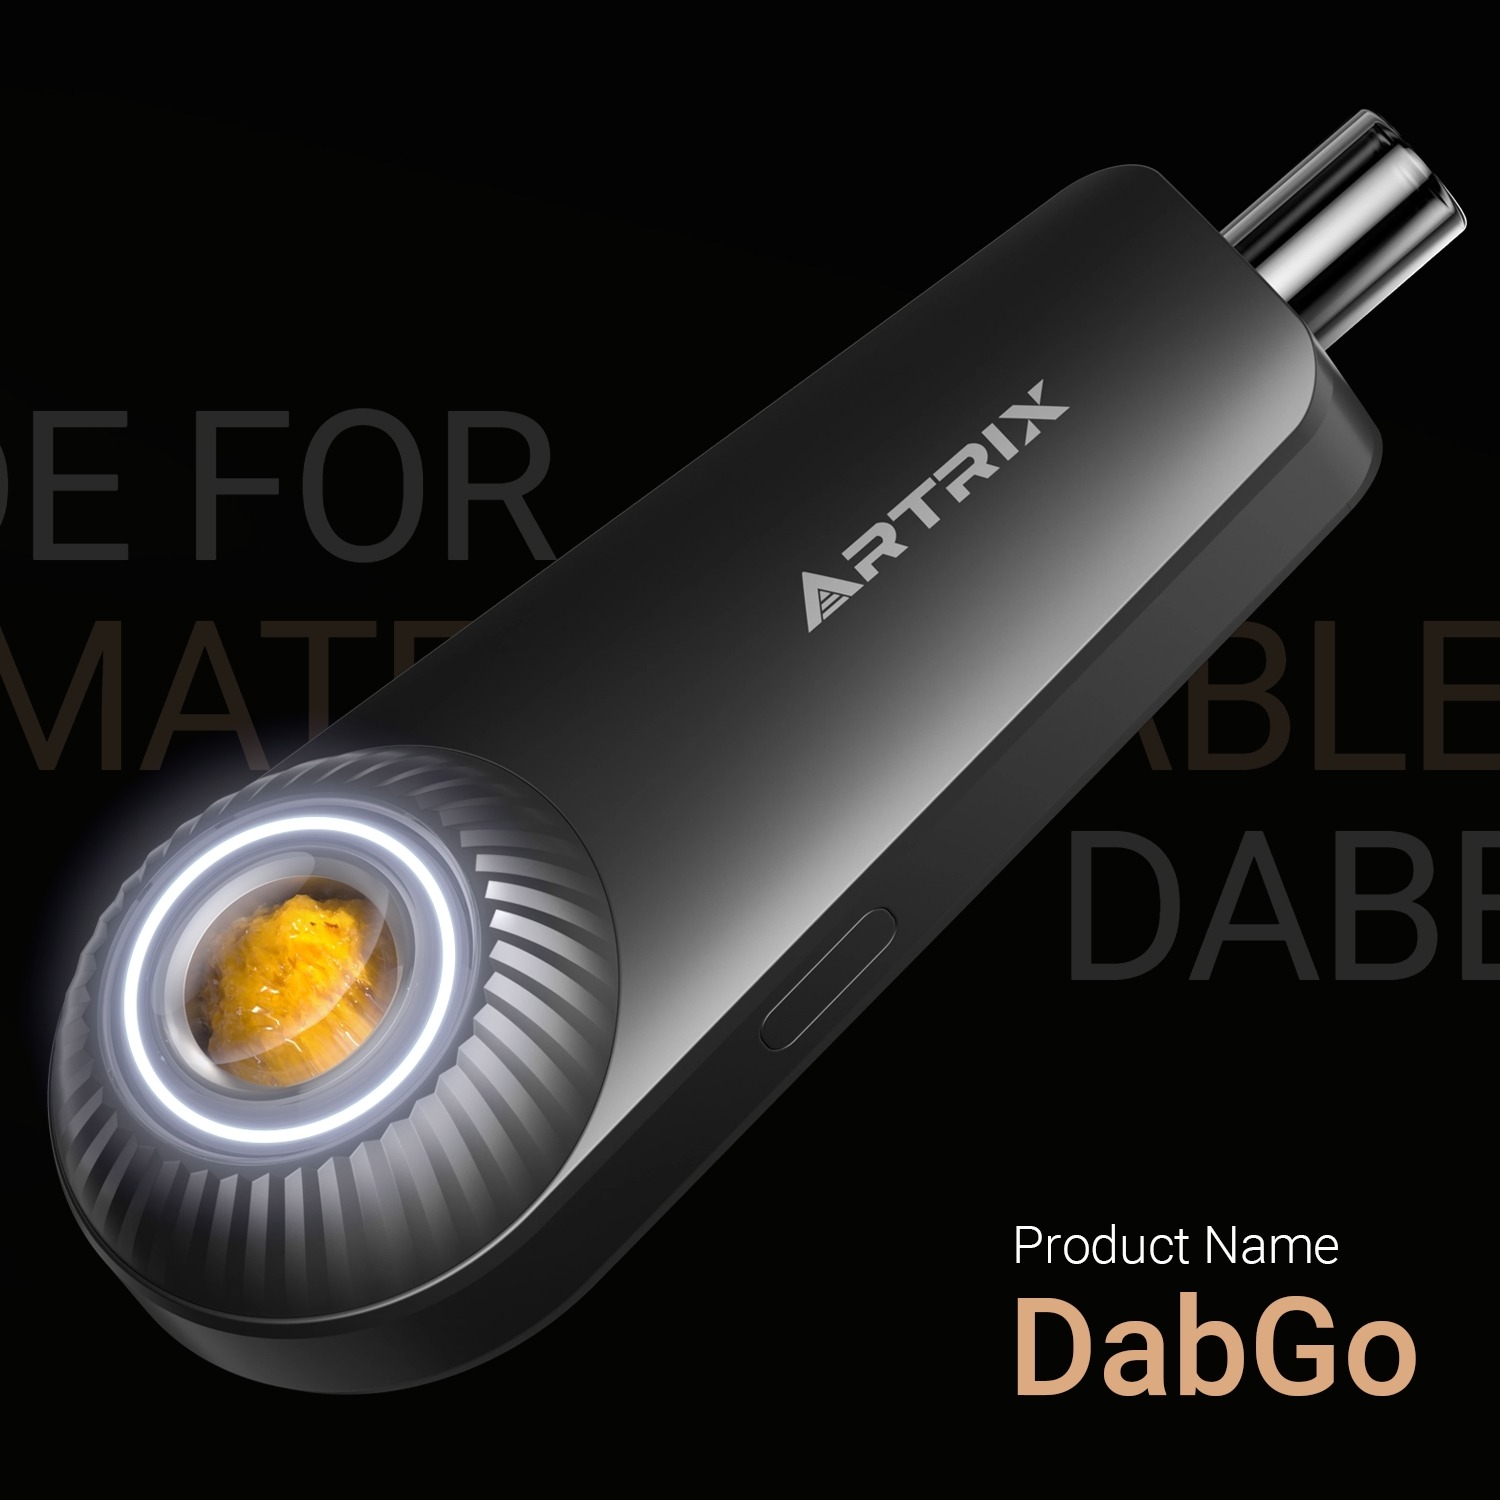 Get Your DabGo! Be Among the First Beneficiaries 1176